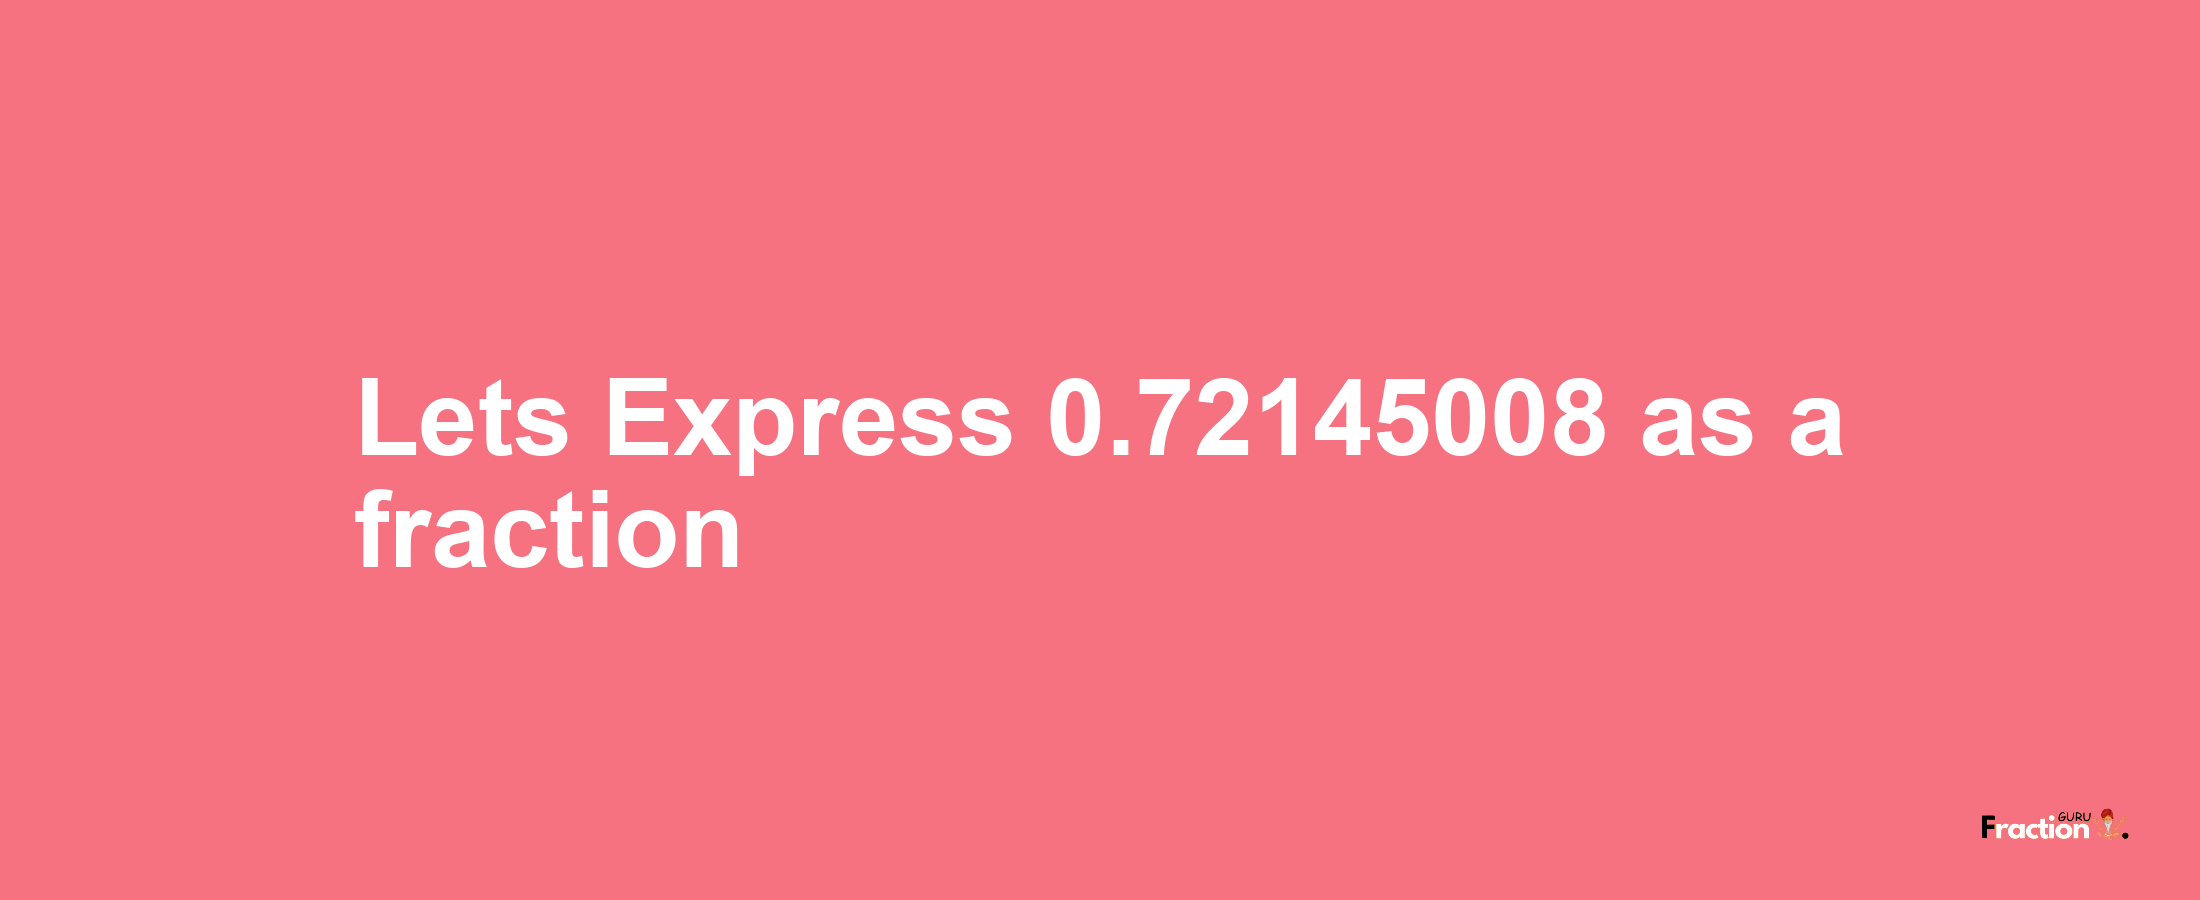 Lets Express 0.72145008 as afraction